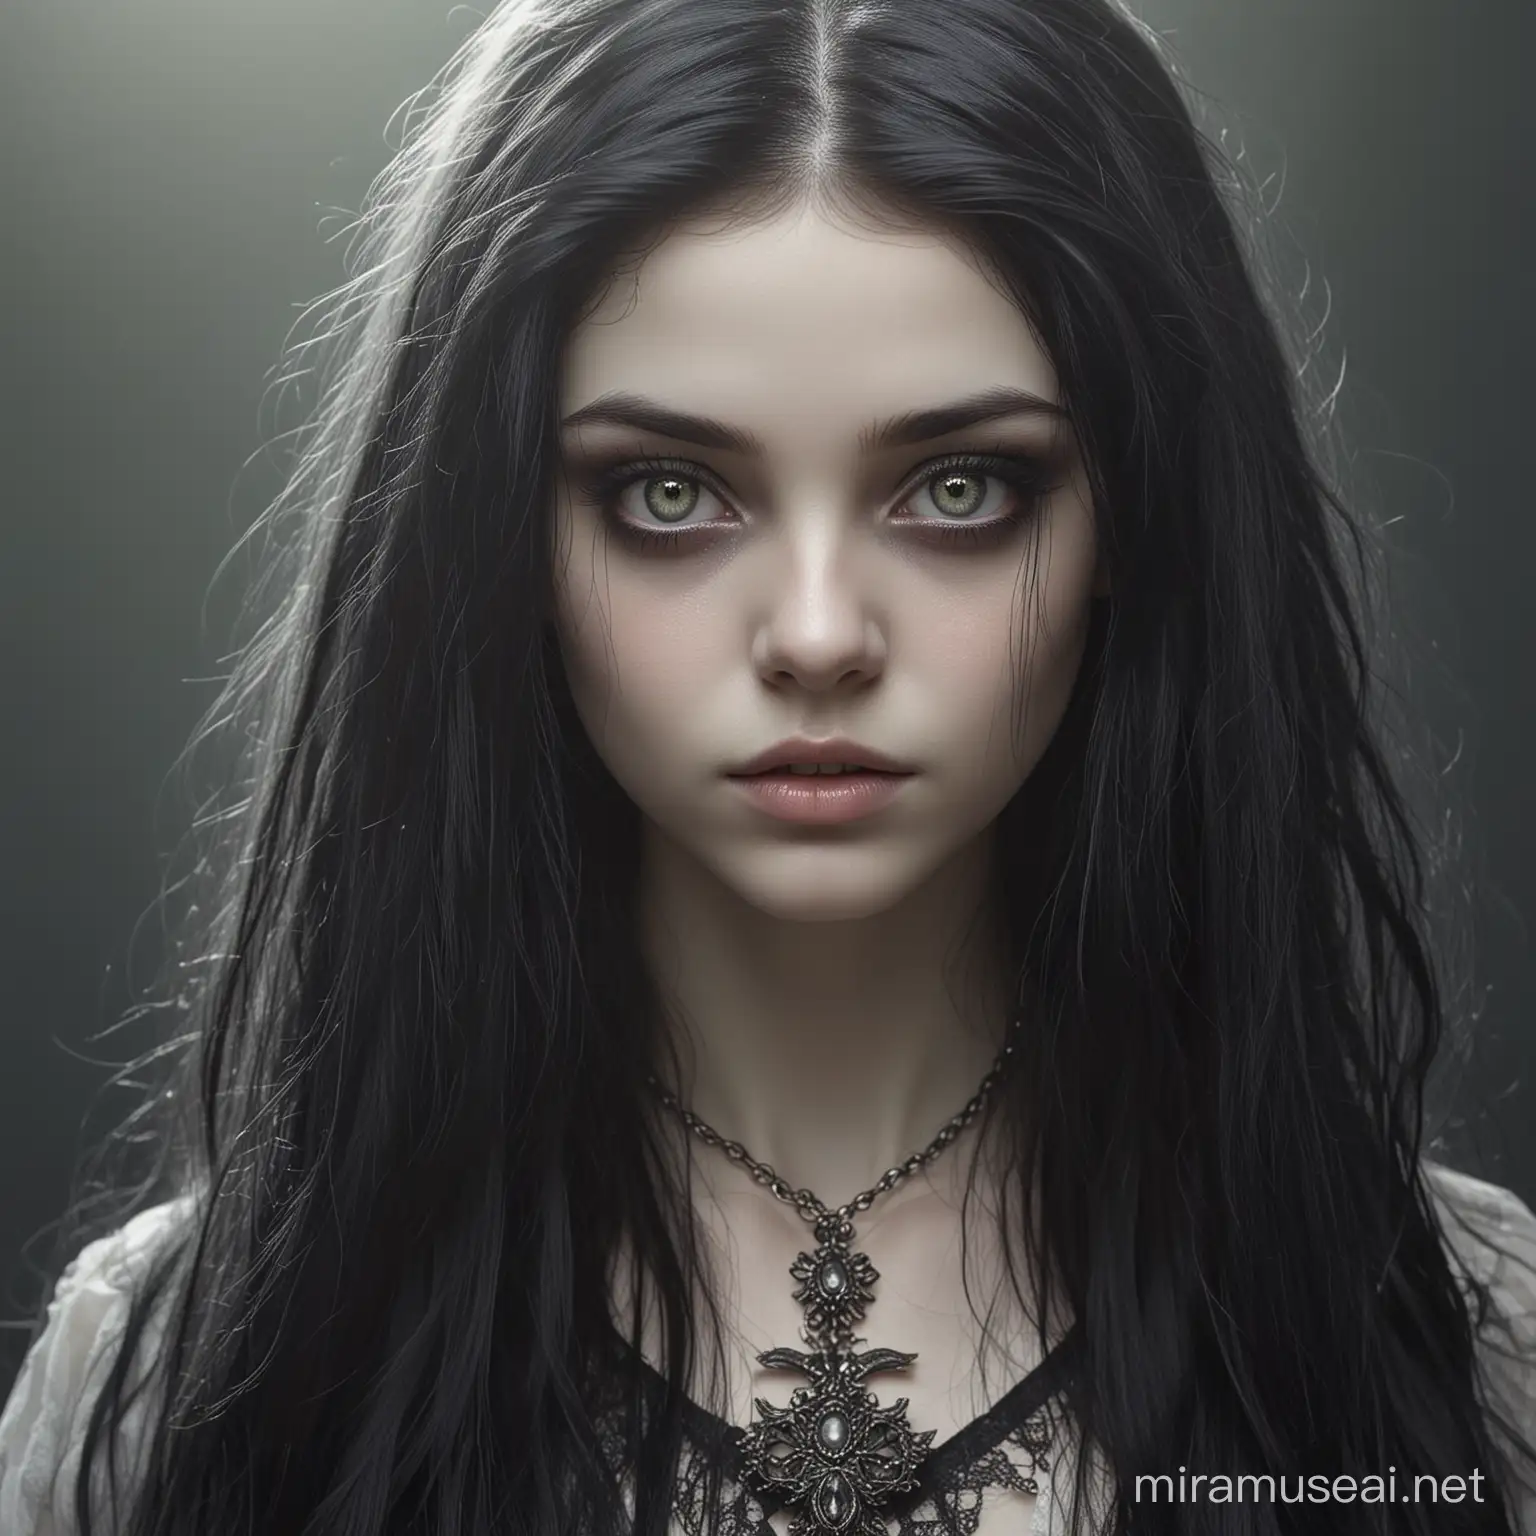 Ethereal Undead Teenage Beauty with Silver Eyes